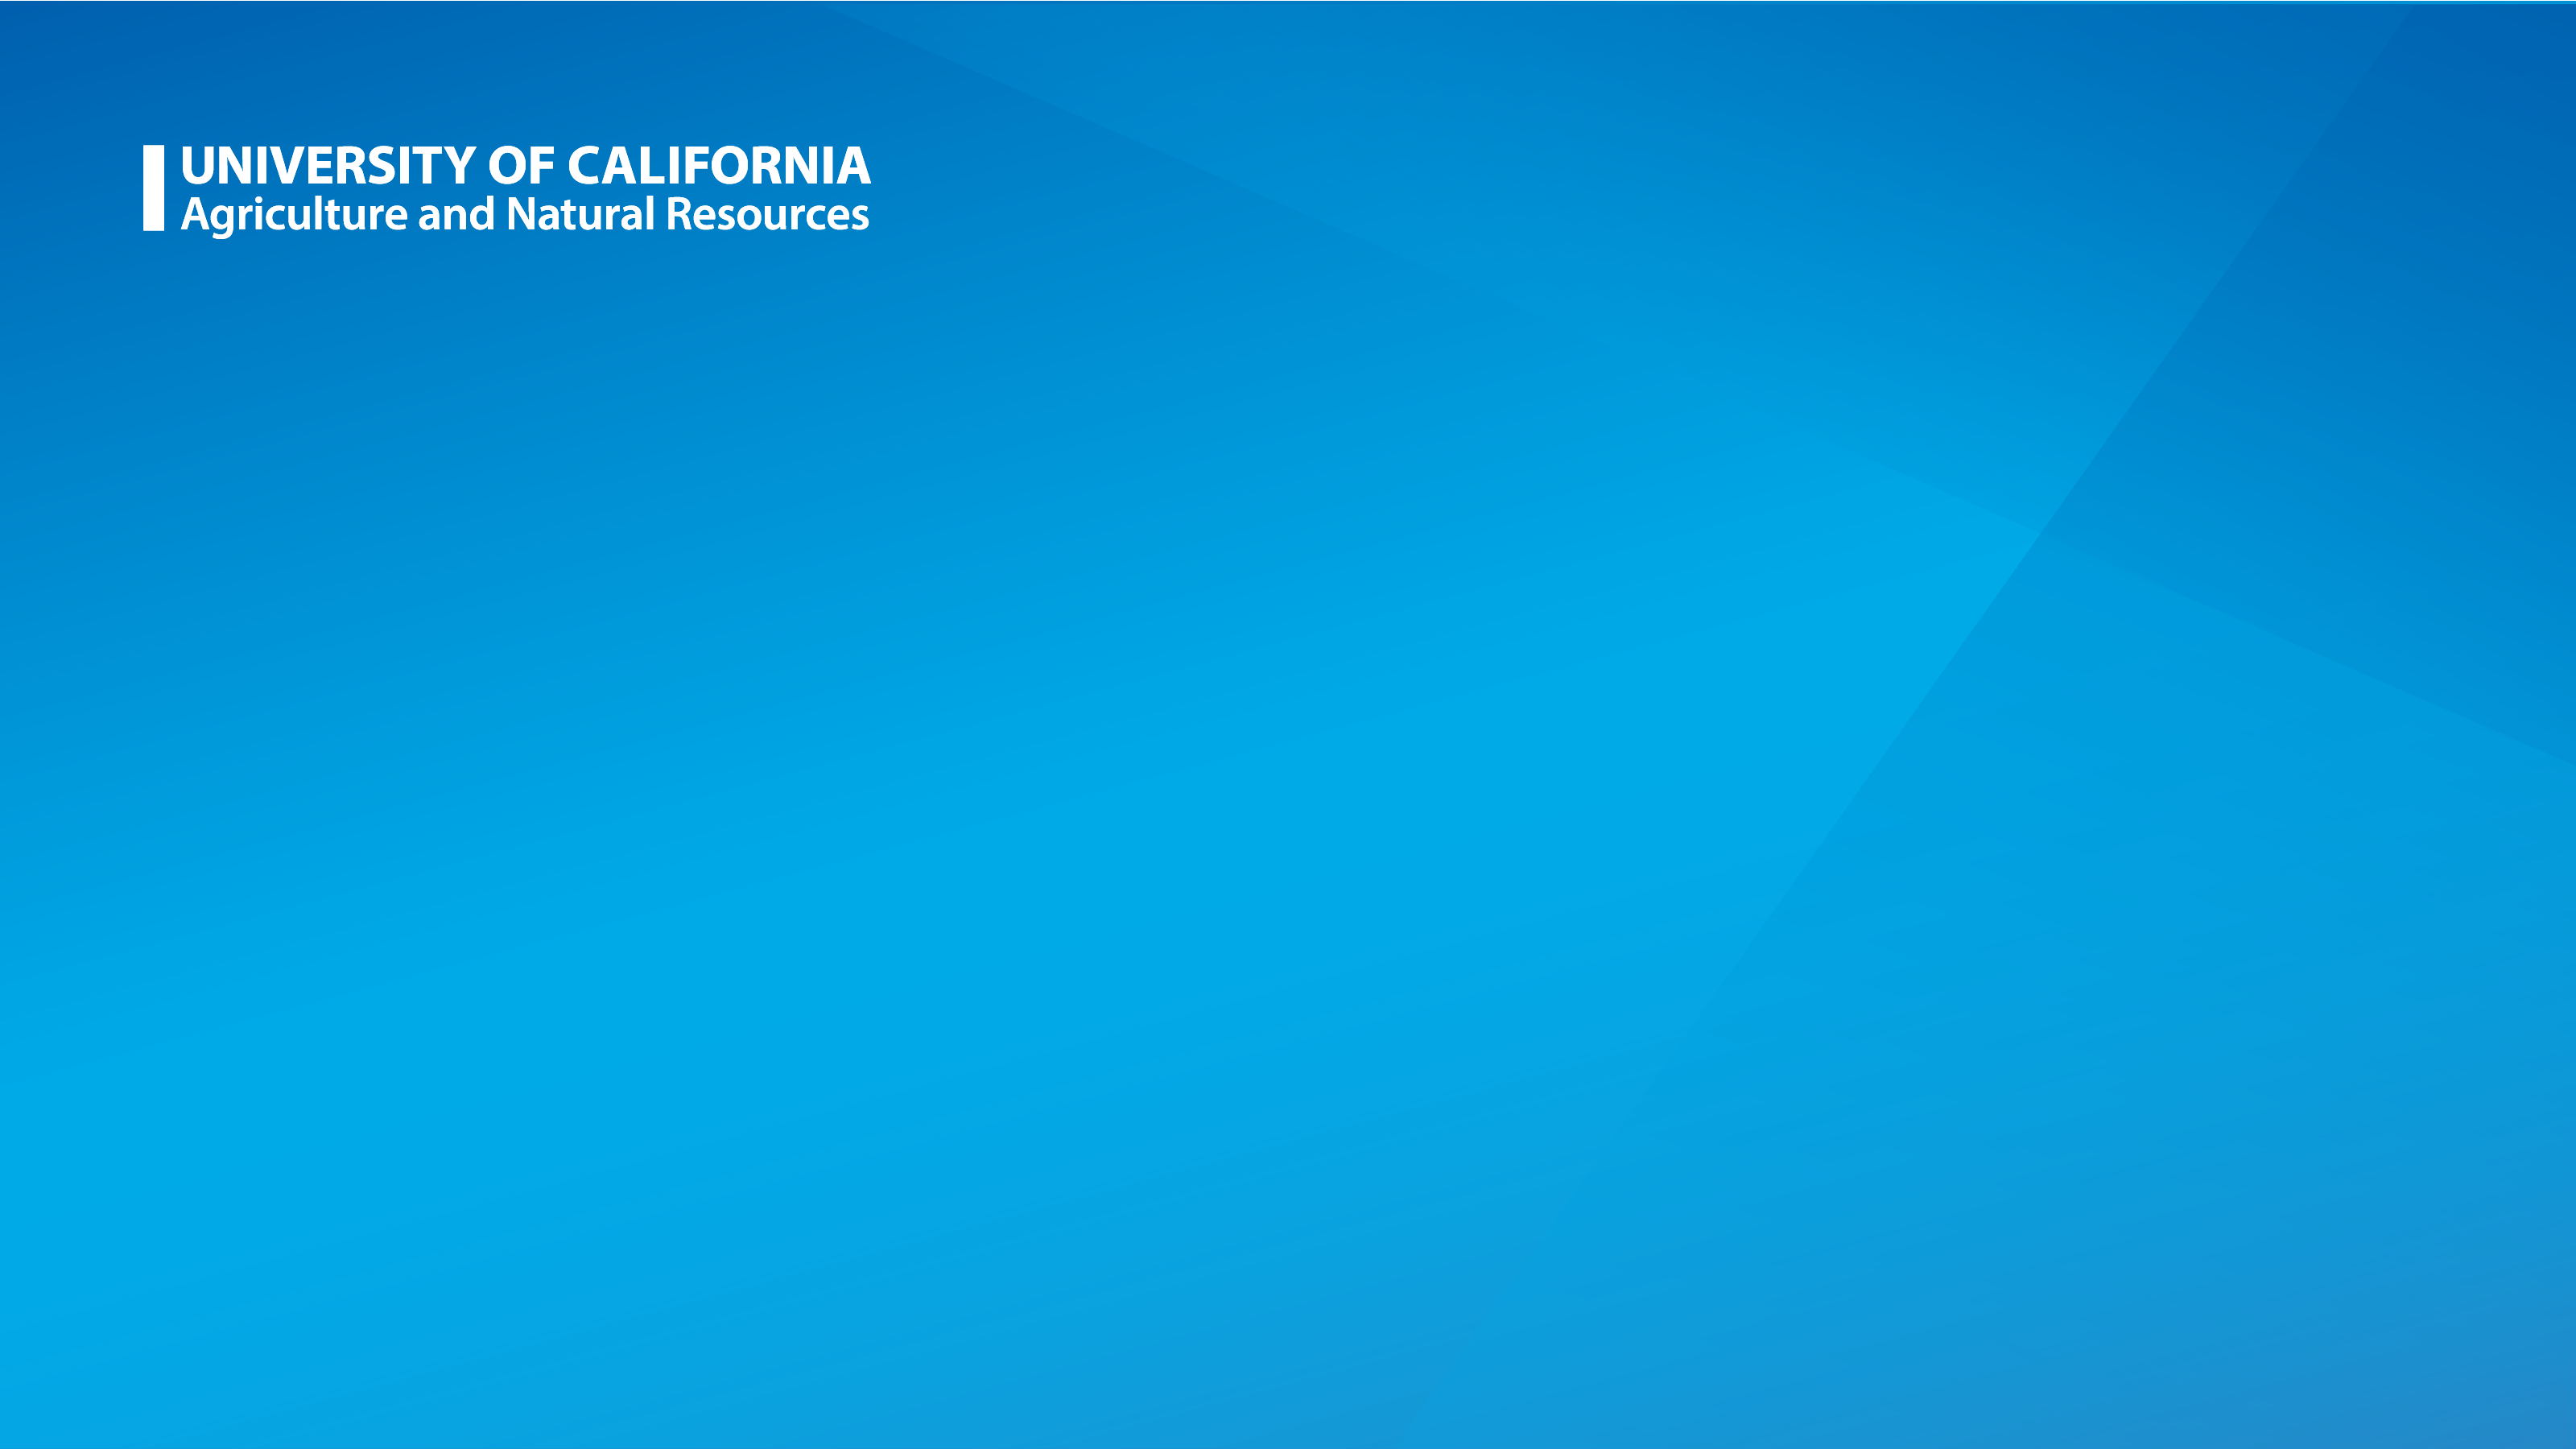 Zoom backgrounds with ANR and UCCE logos available - ANR Employee News -  ANR Blogs